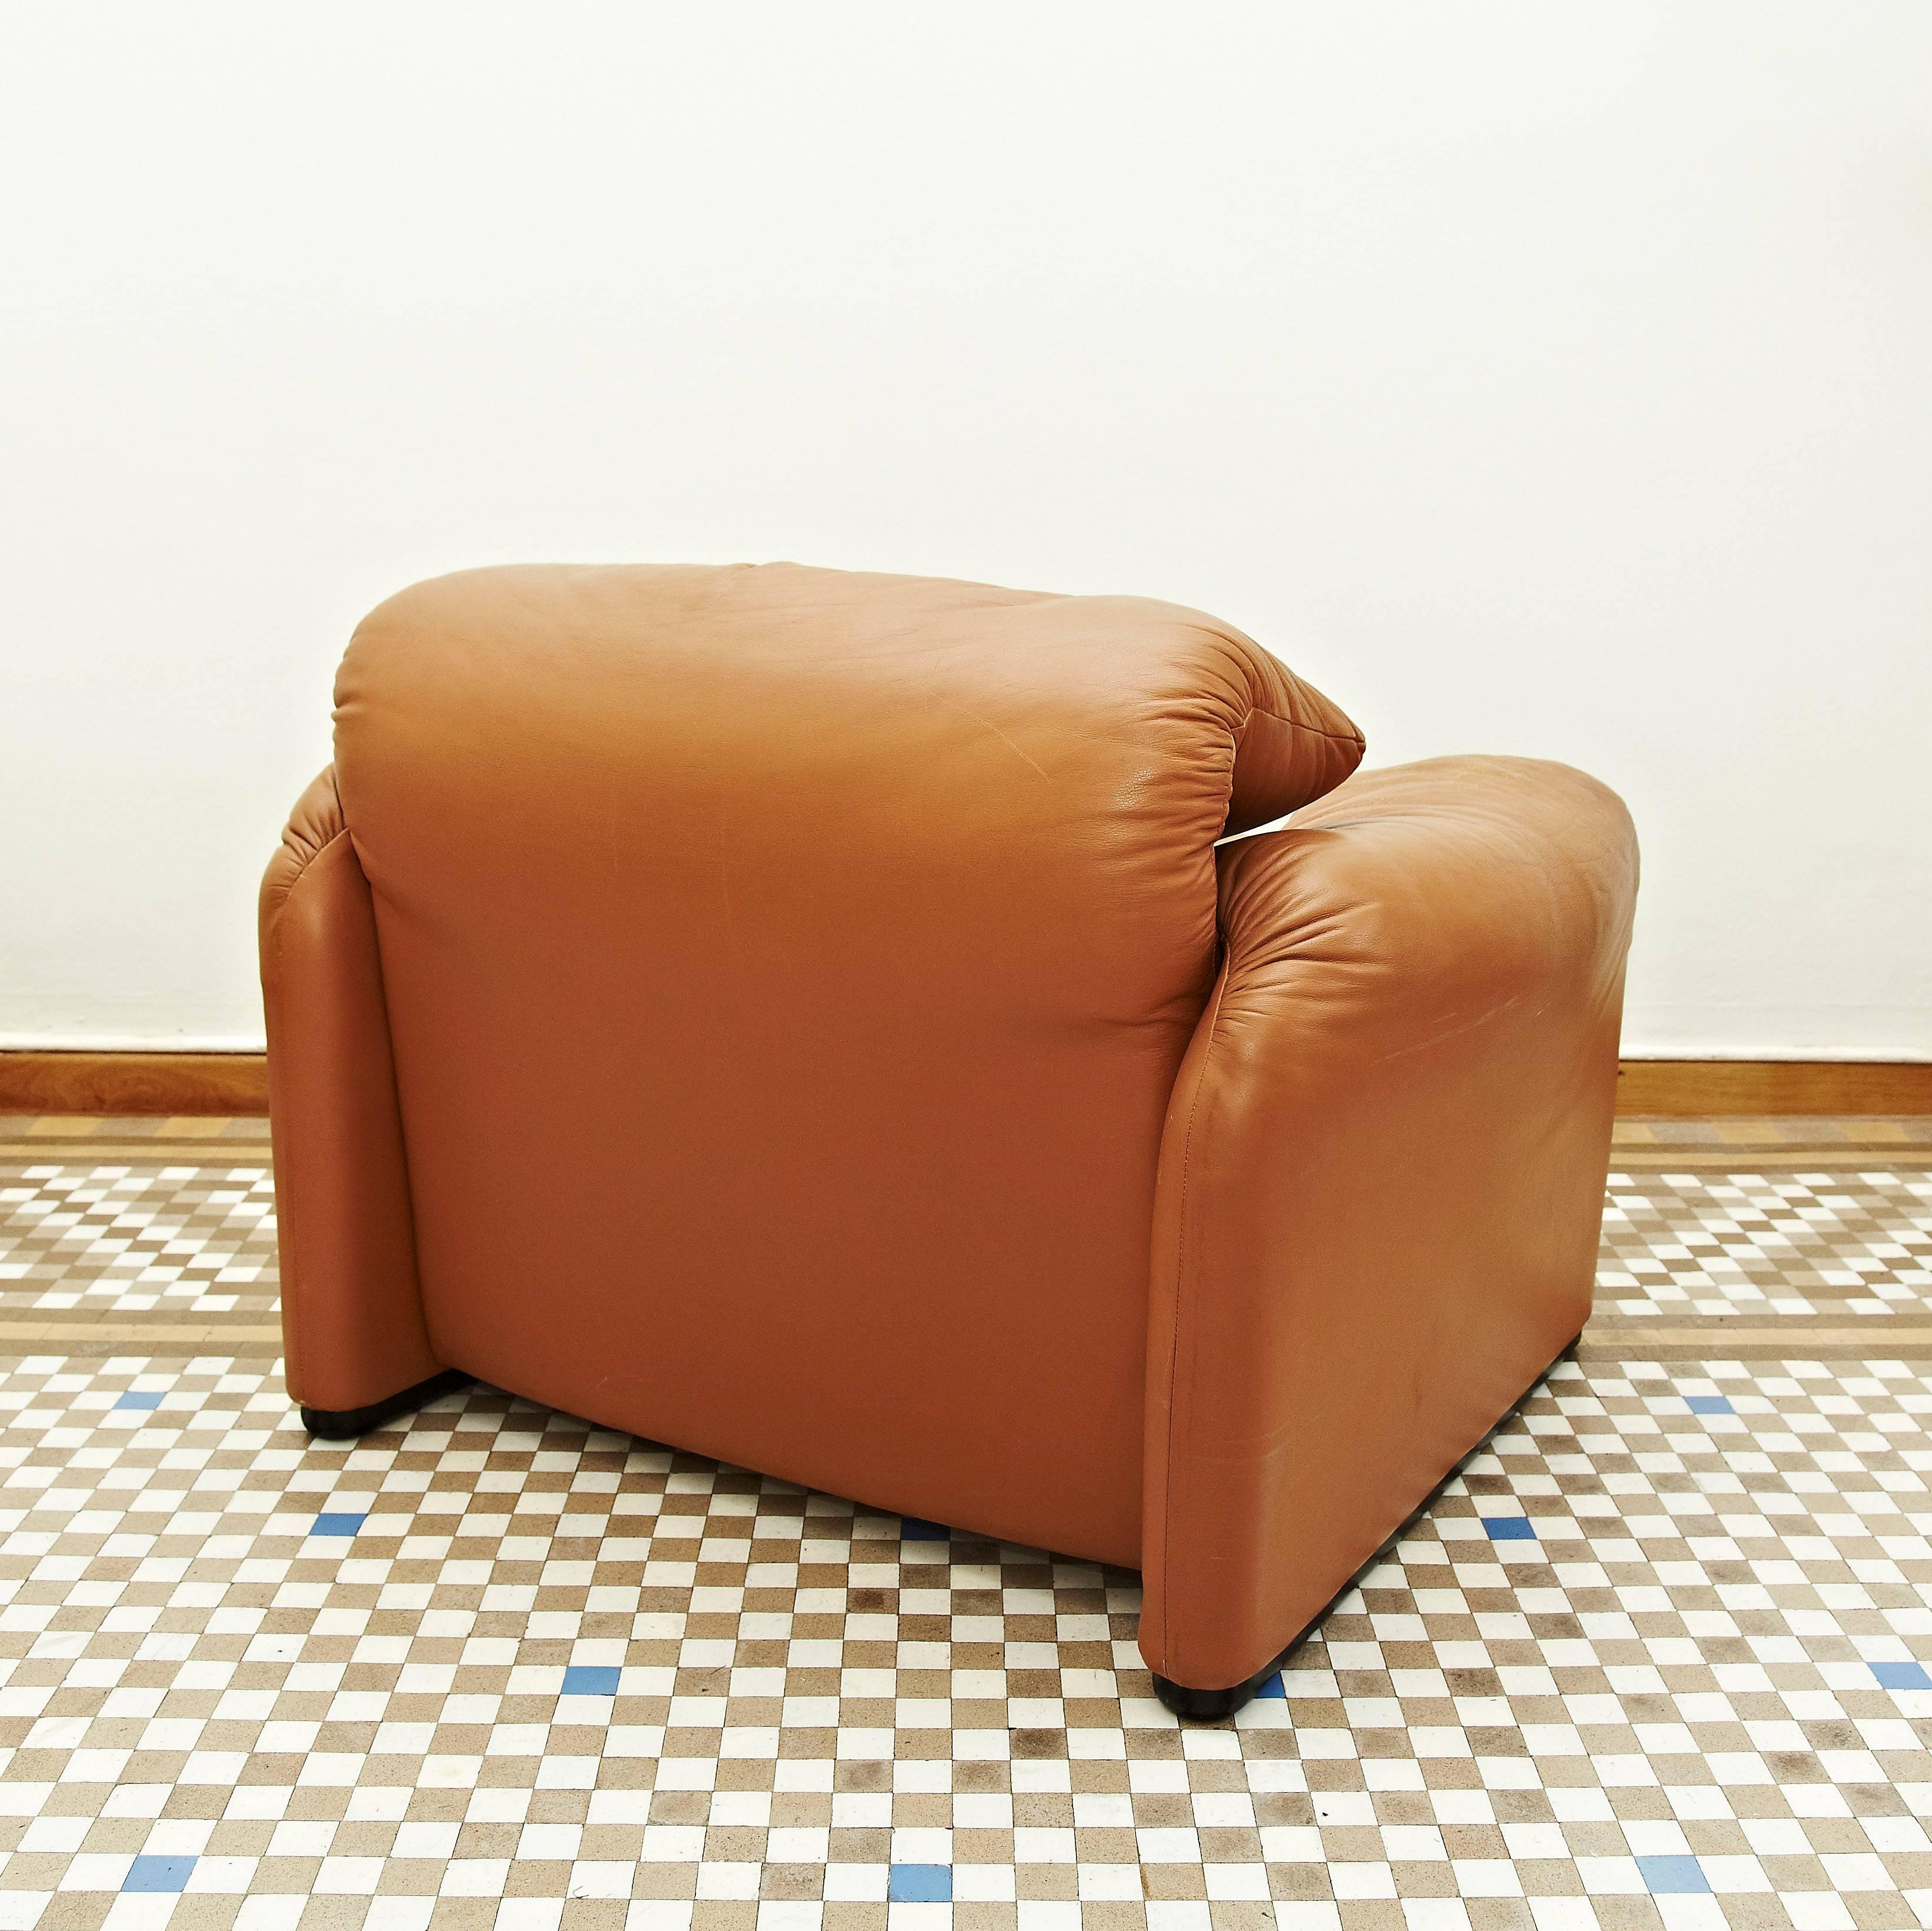 This easy chair, model Maralunga, was designed by Vico Magistretti for Cassina during the 1960s. 
It is upholstered in cognac leather and remains in a good vintage condition, with minor wear consistent with age and use.